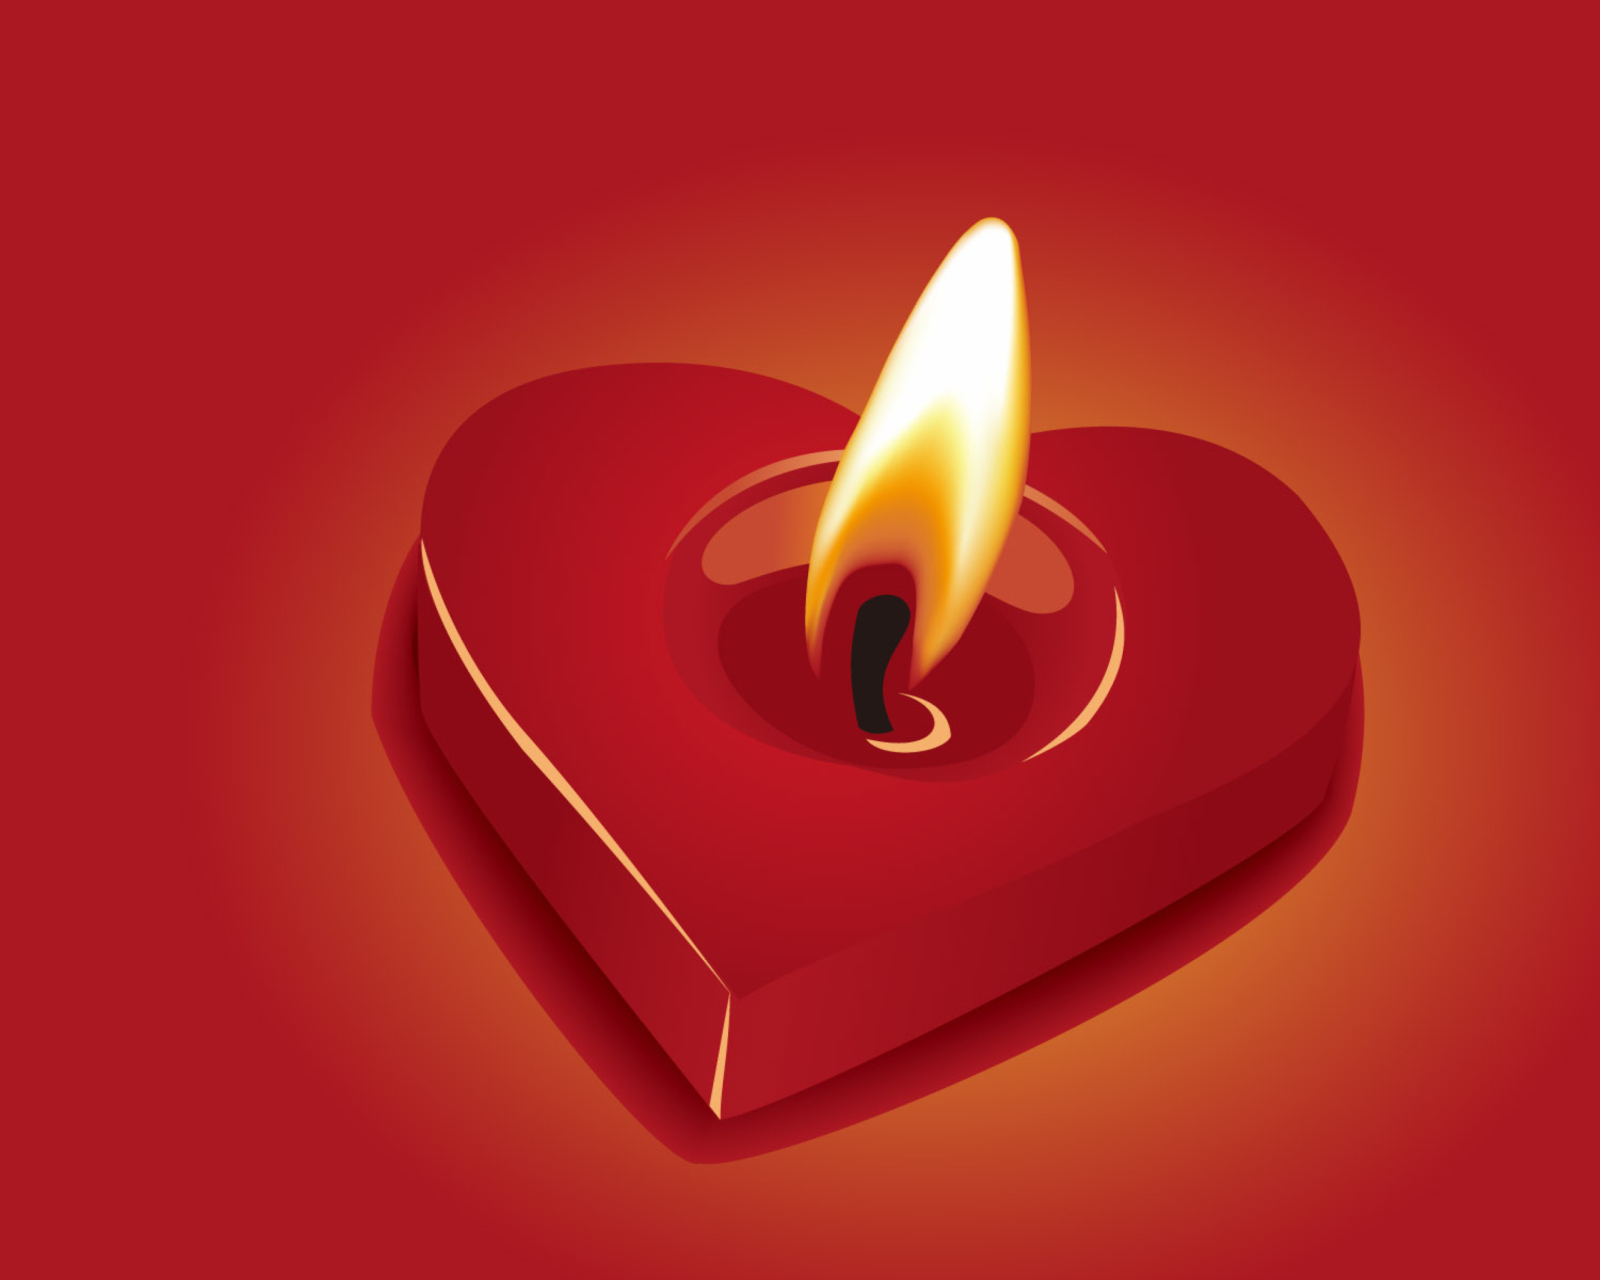 Heart Shaped Candle wallpaper 1600x1280